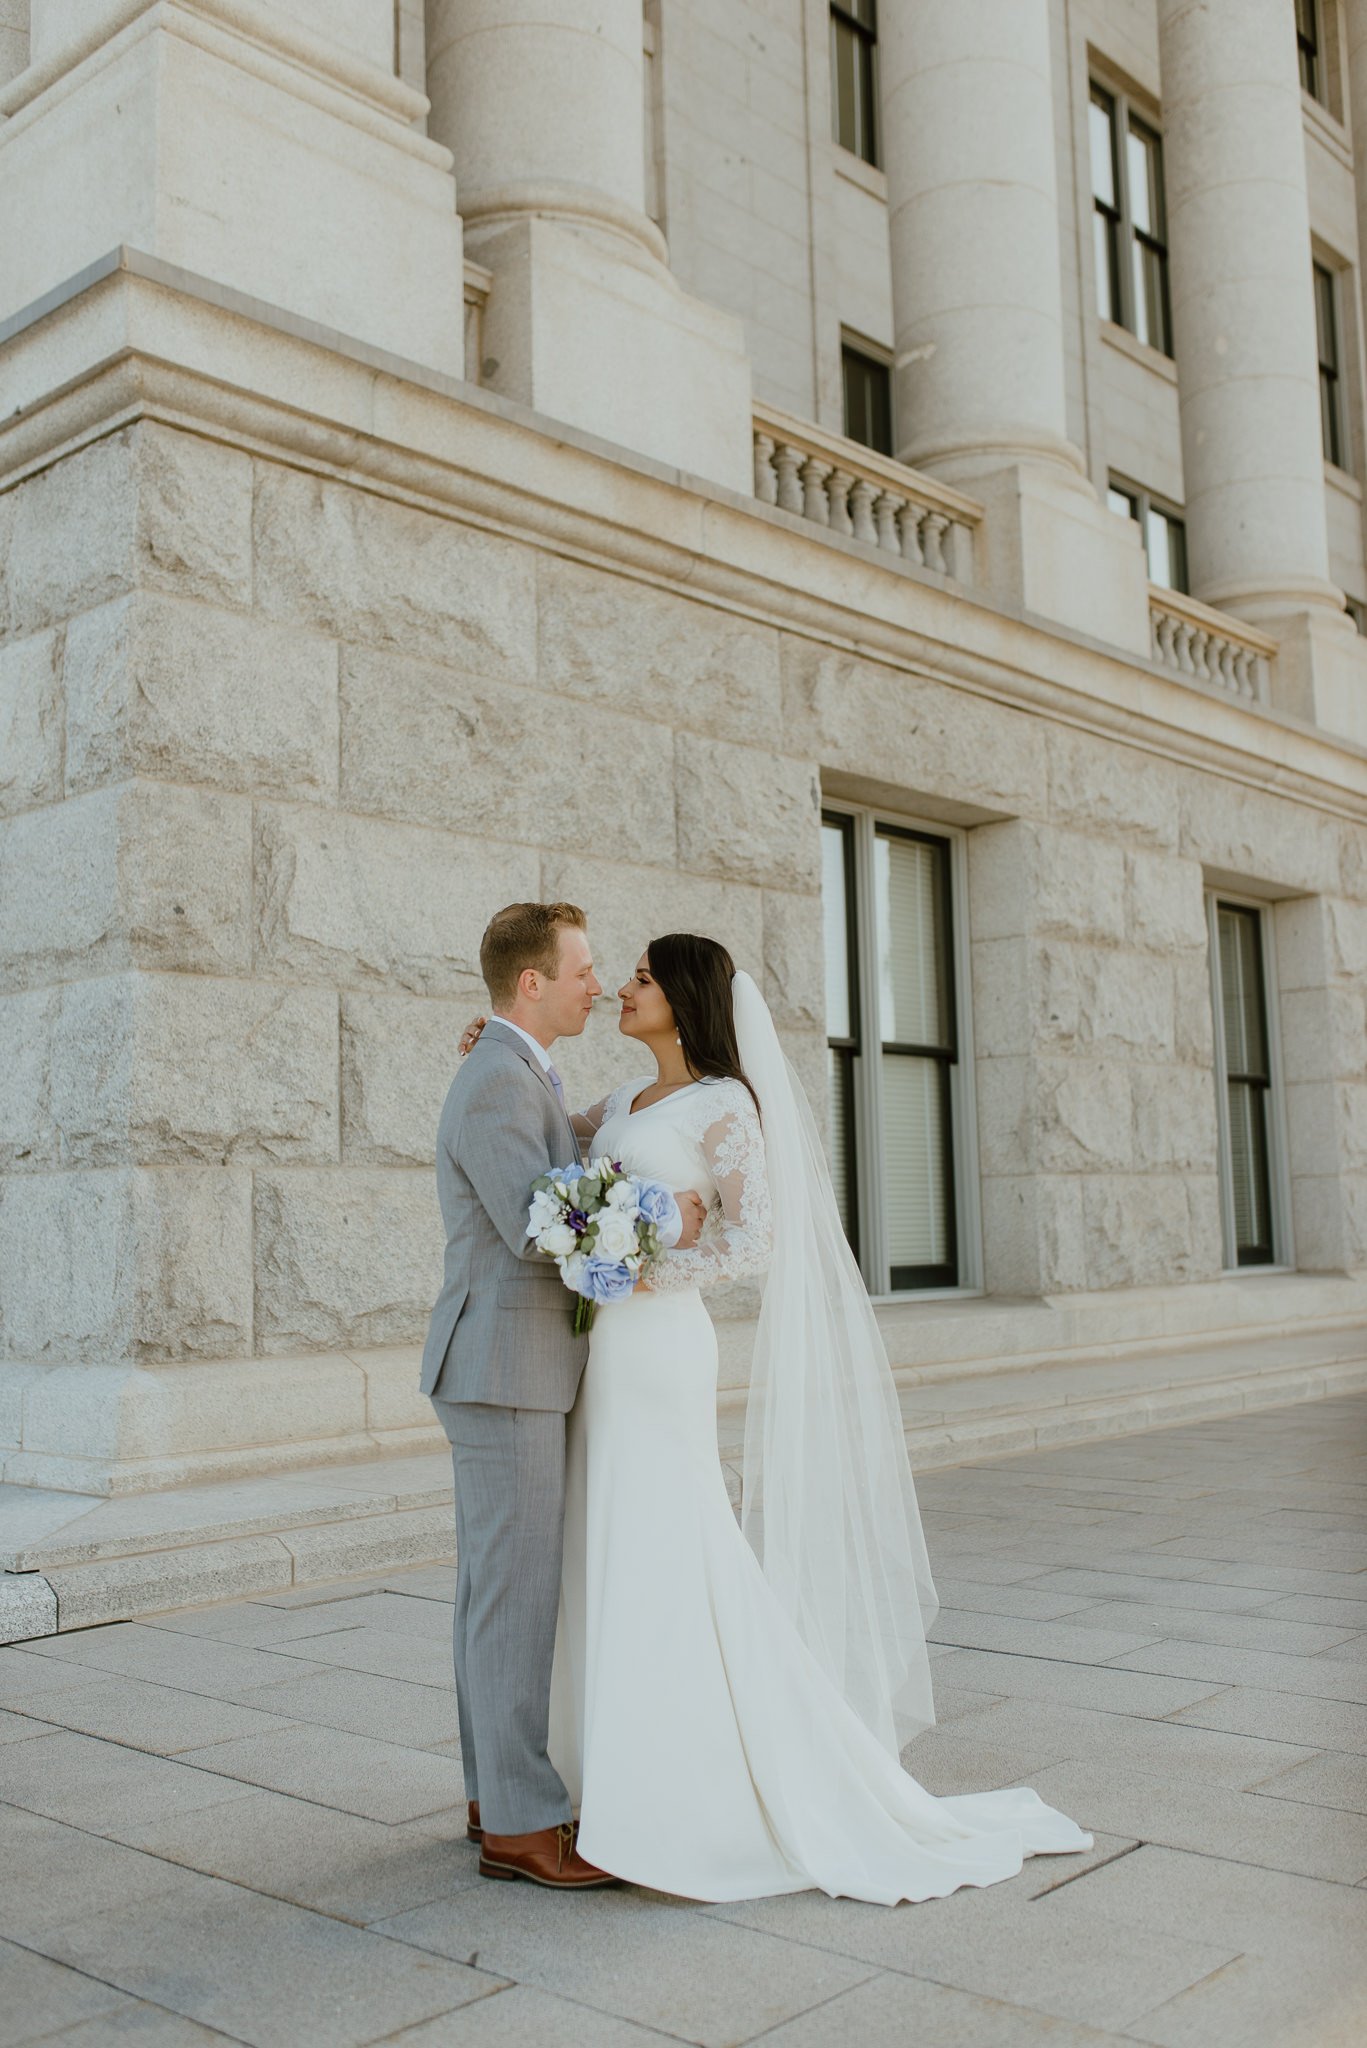 Utah-State-Capitol-Spring-Blossons-Bountiful-LDS-Wedding-Hopesandcheers-photo-9